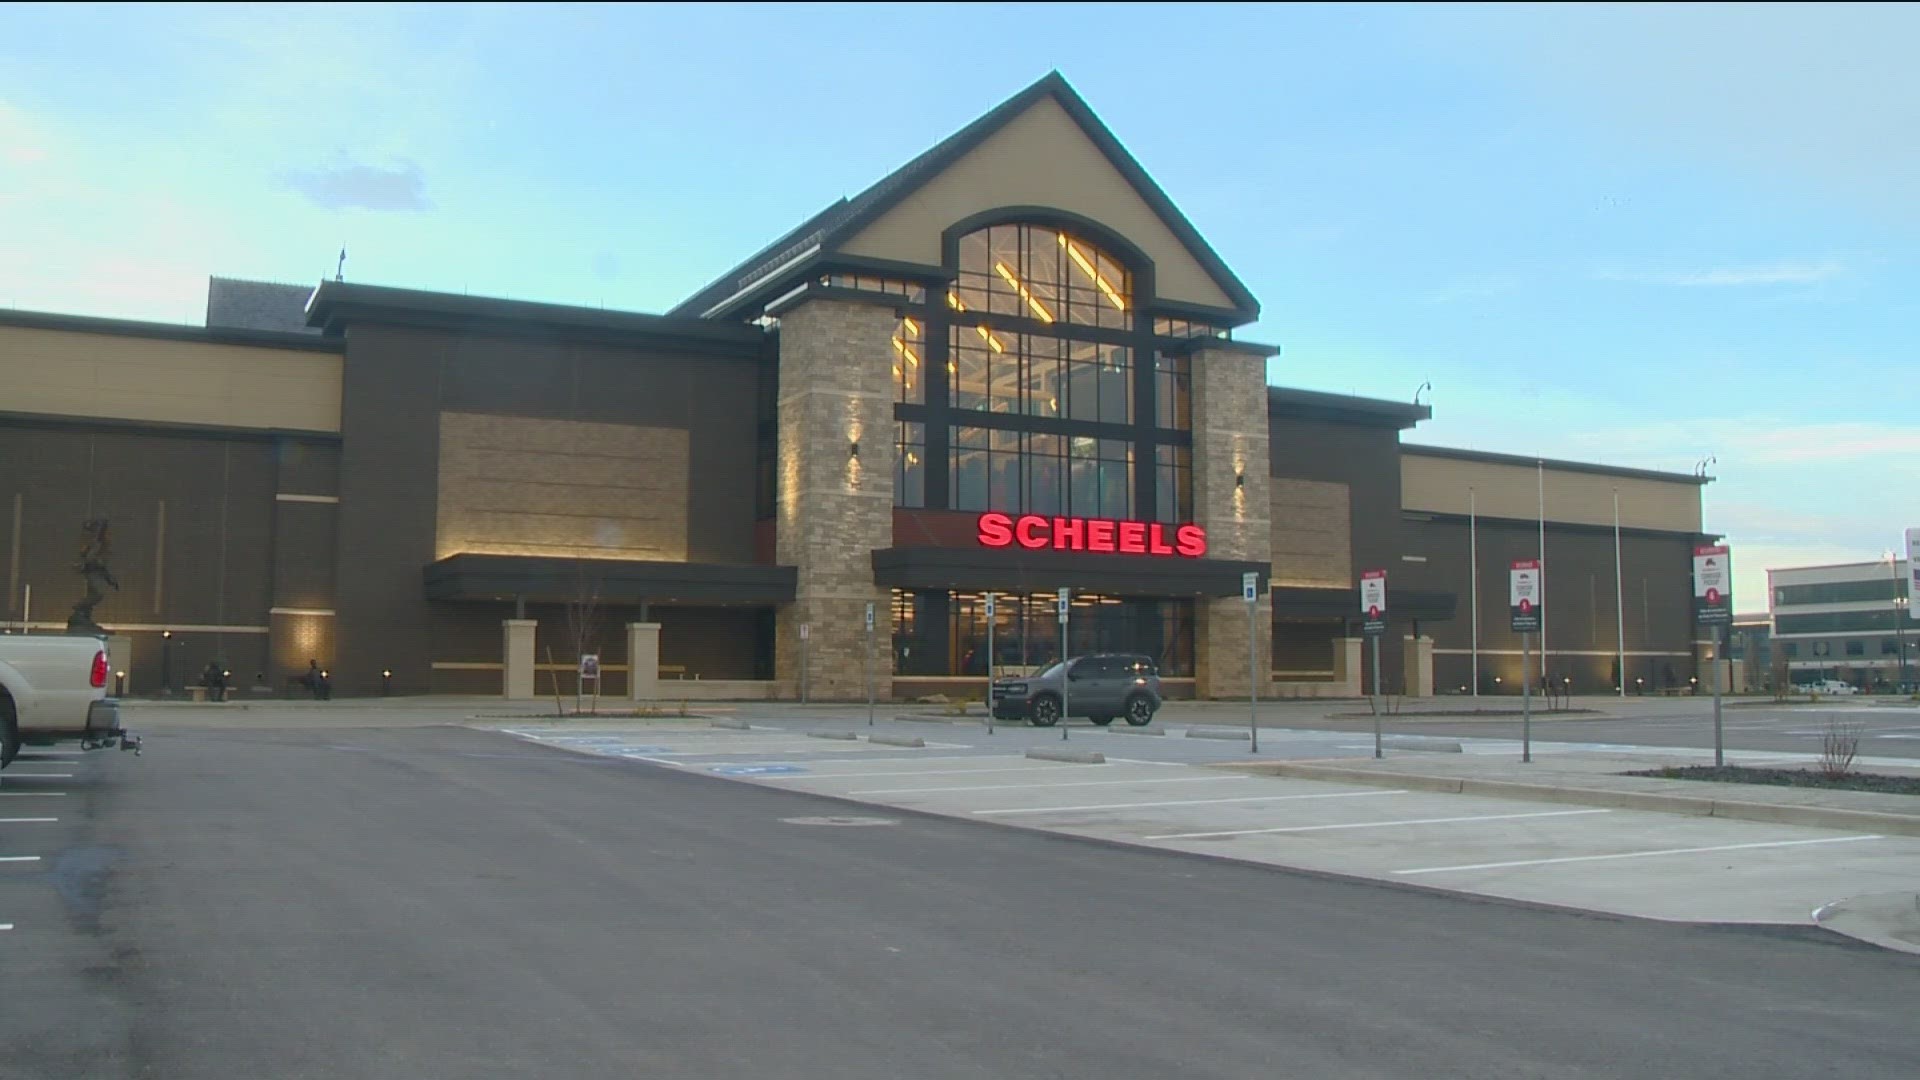 The sporting goods retailer is about a week away from opening its 250,000-square-foot store in Meridian.